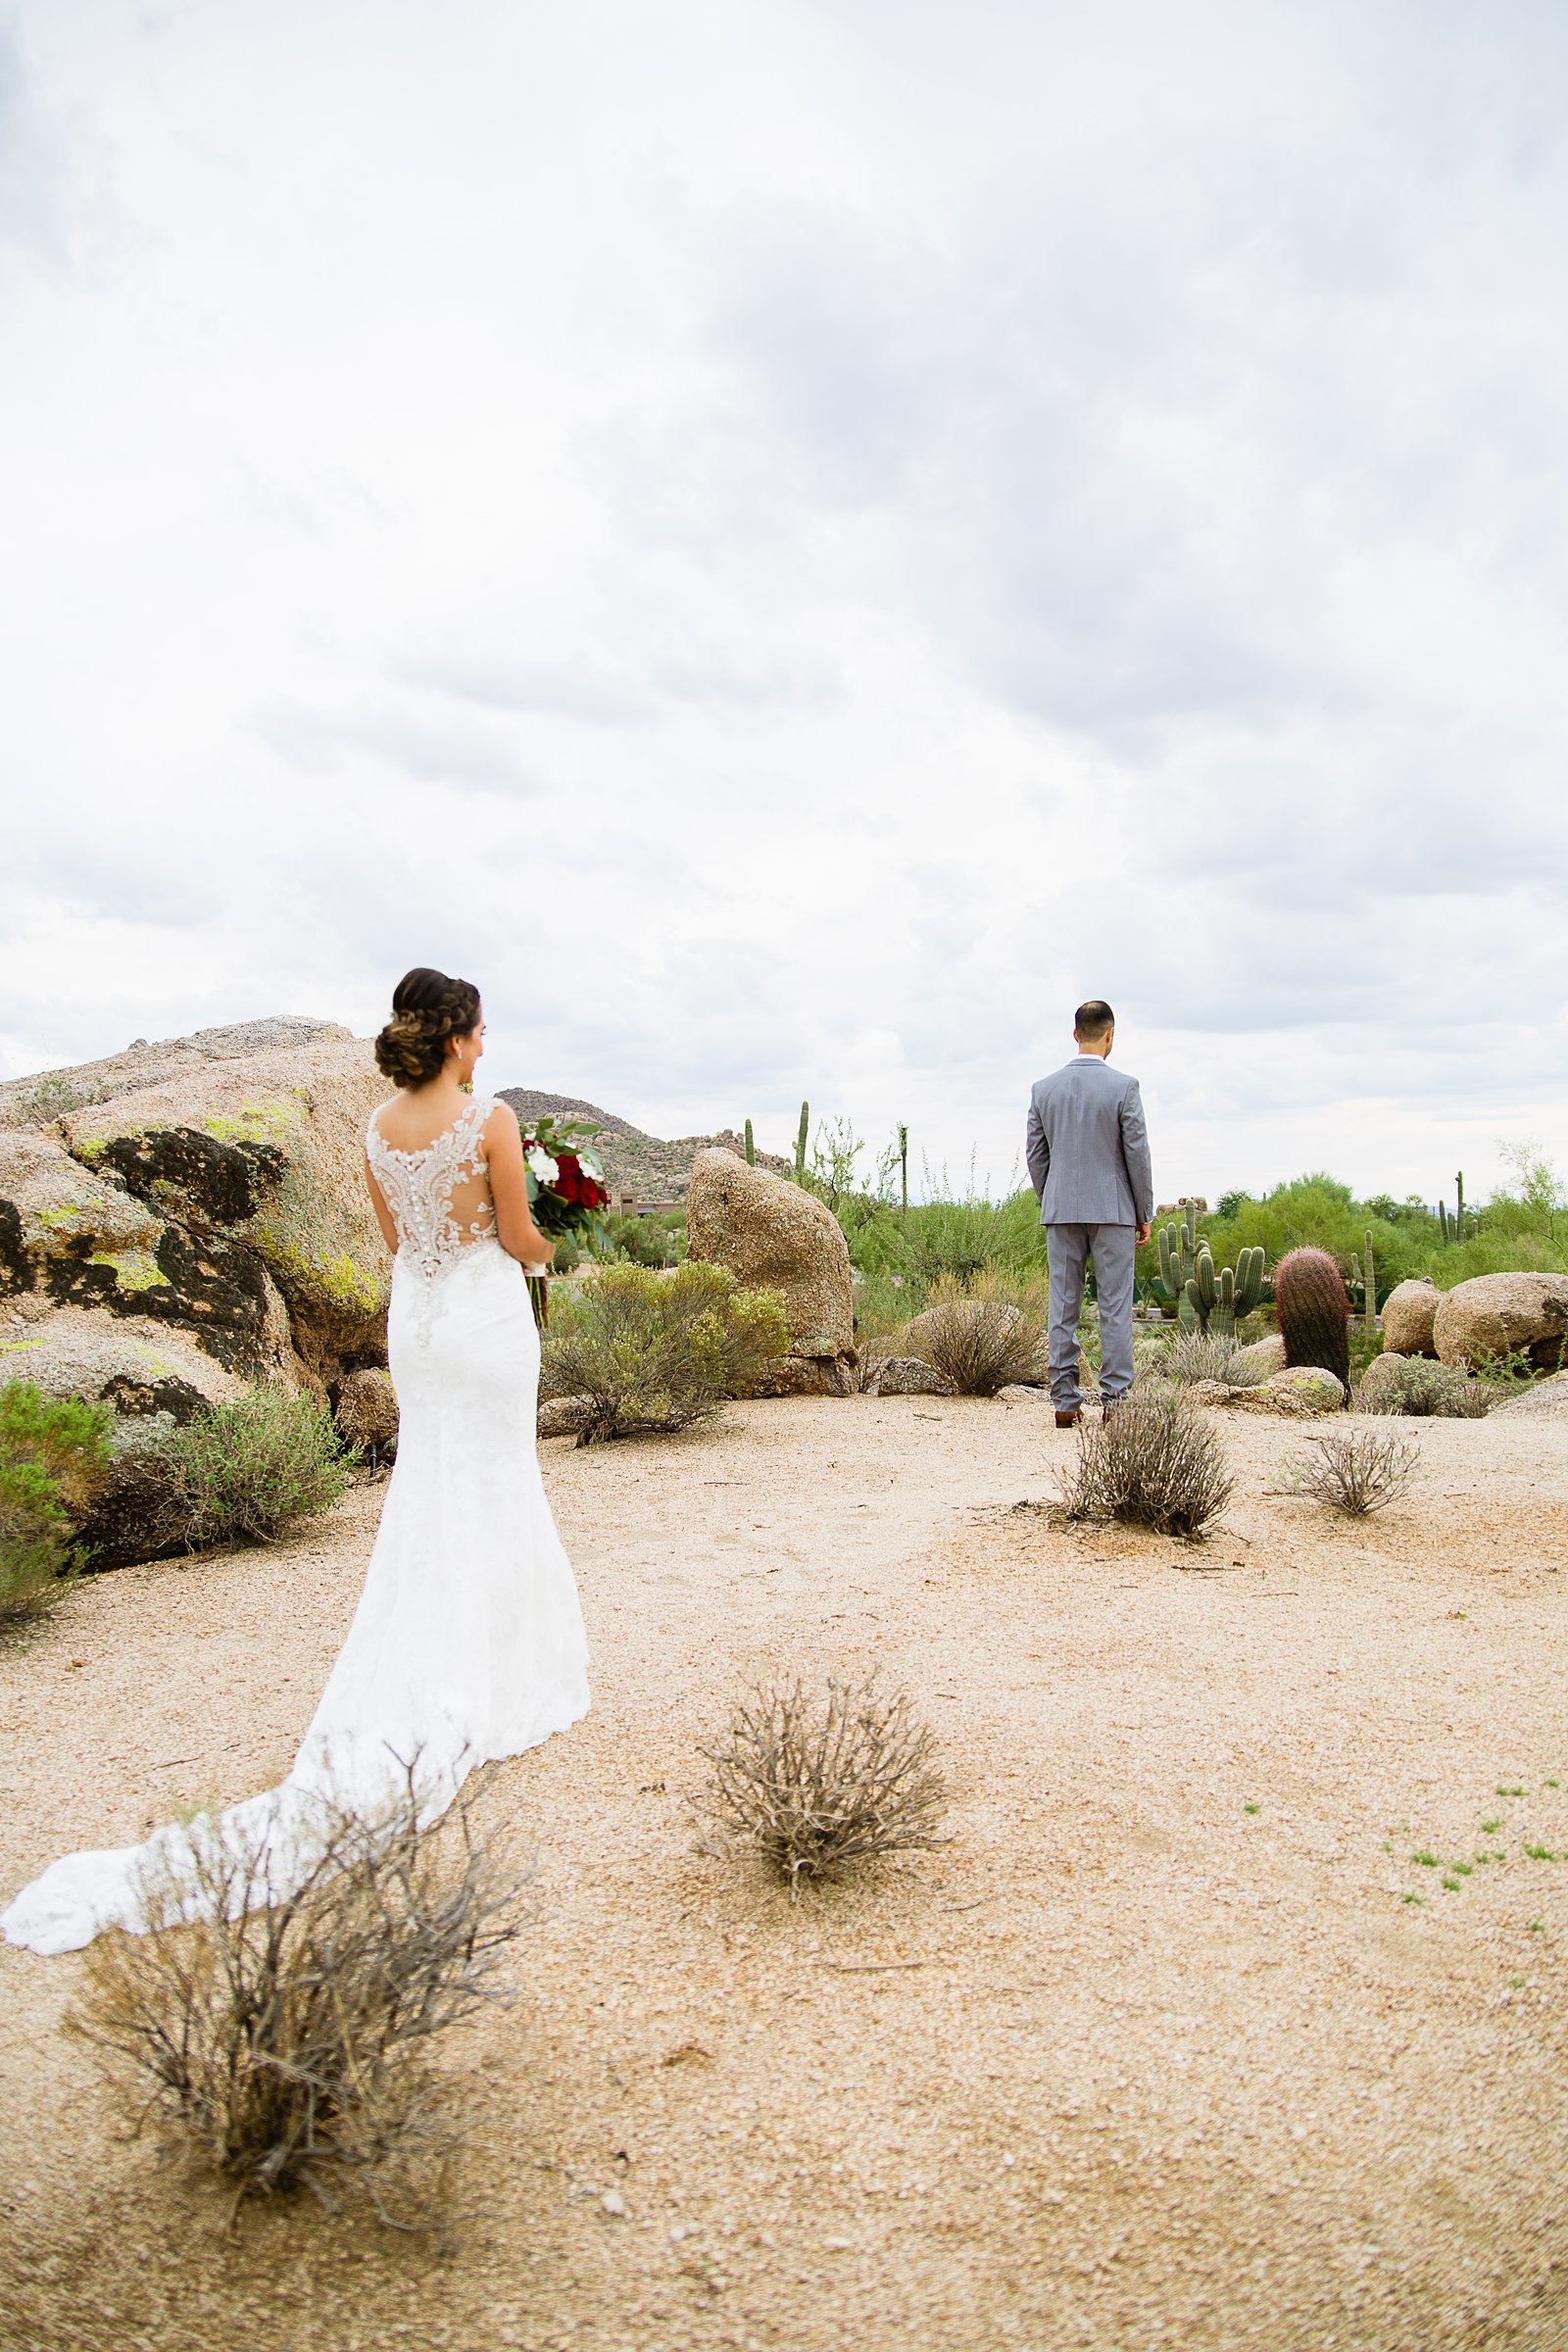 Bride and groom's first look at Troon North by Arizona wedding photographer PMA Photography.